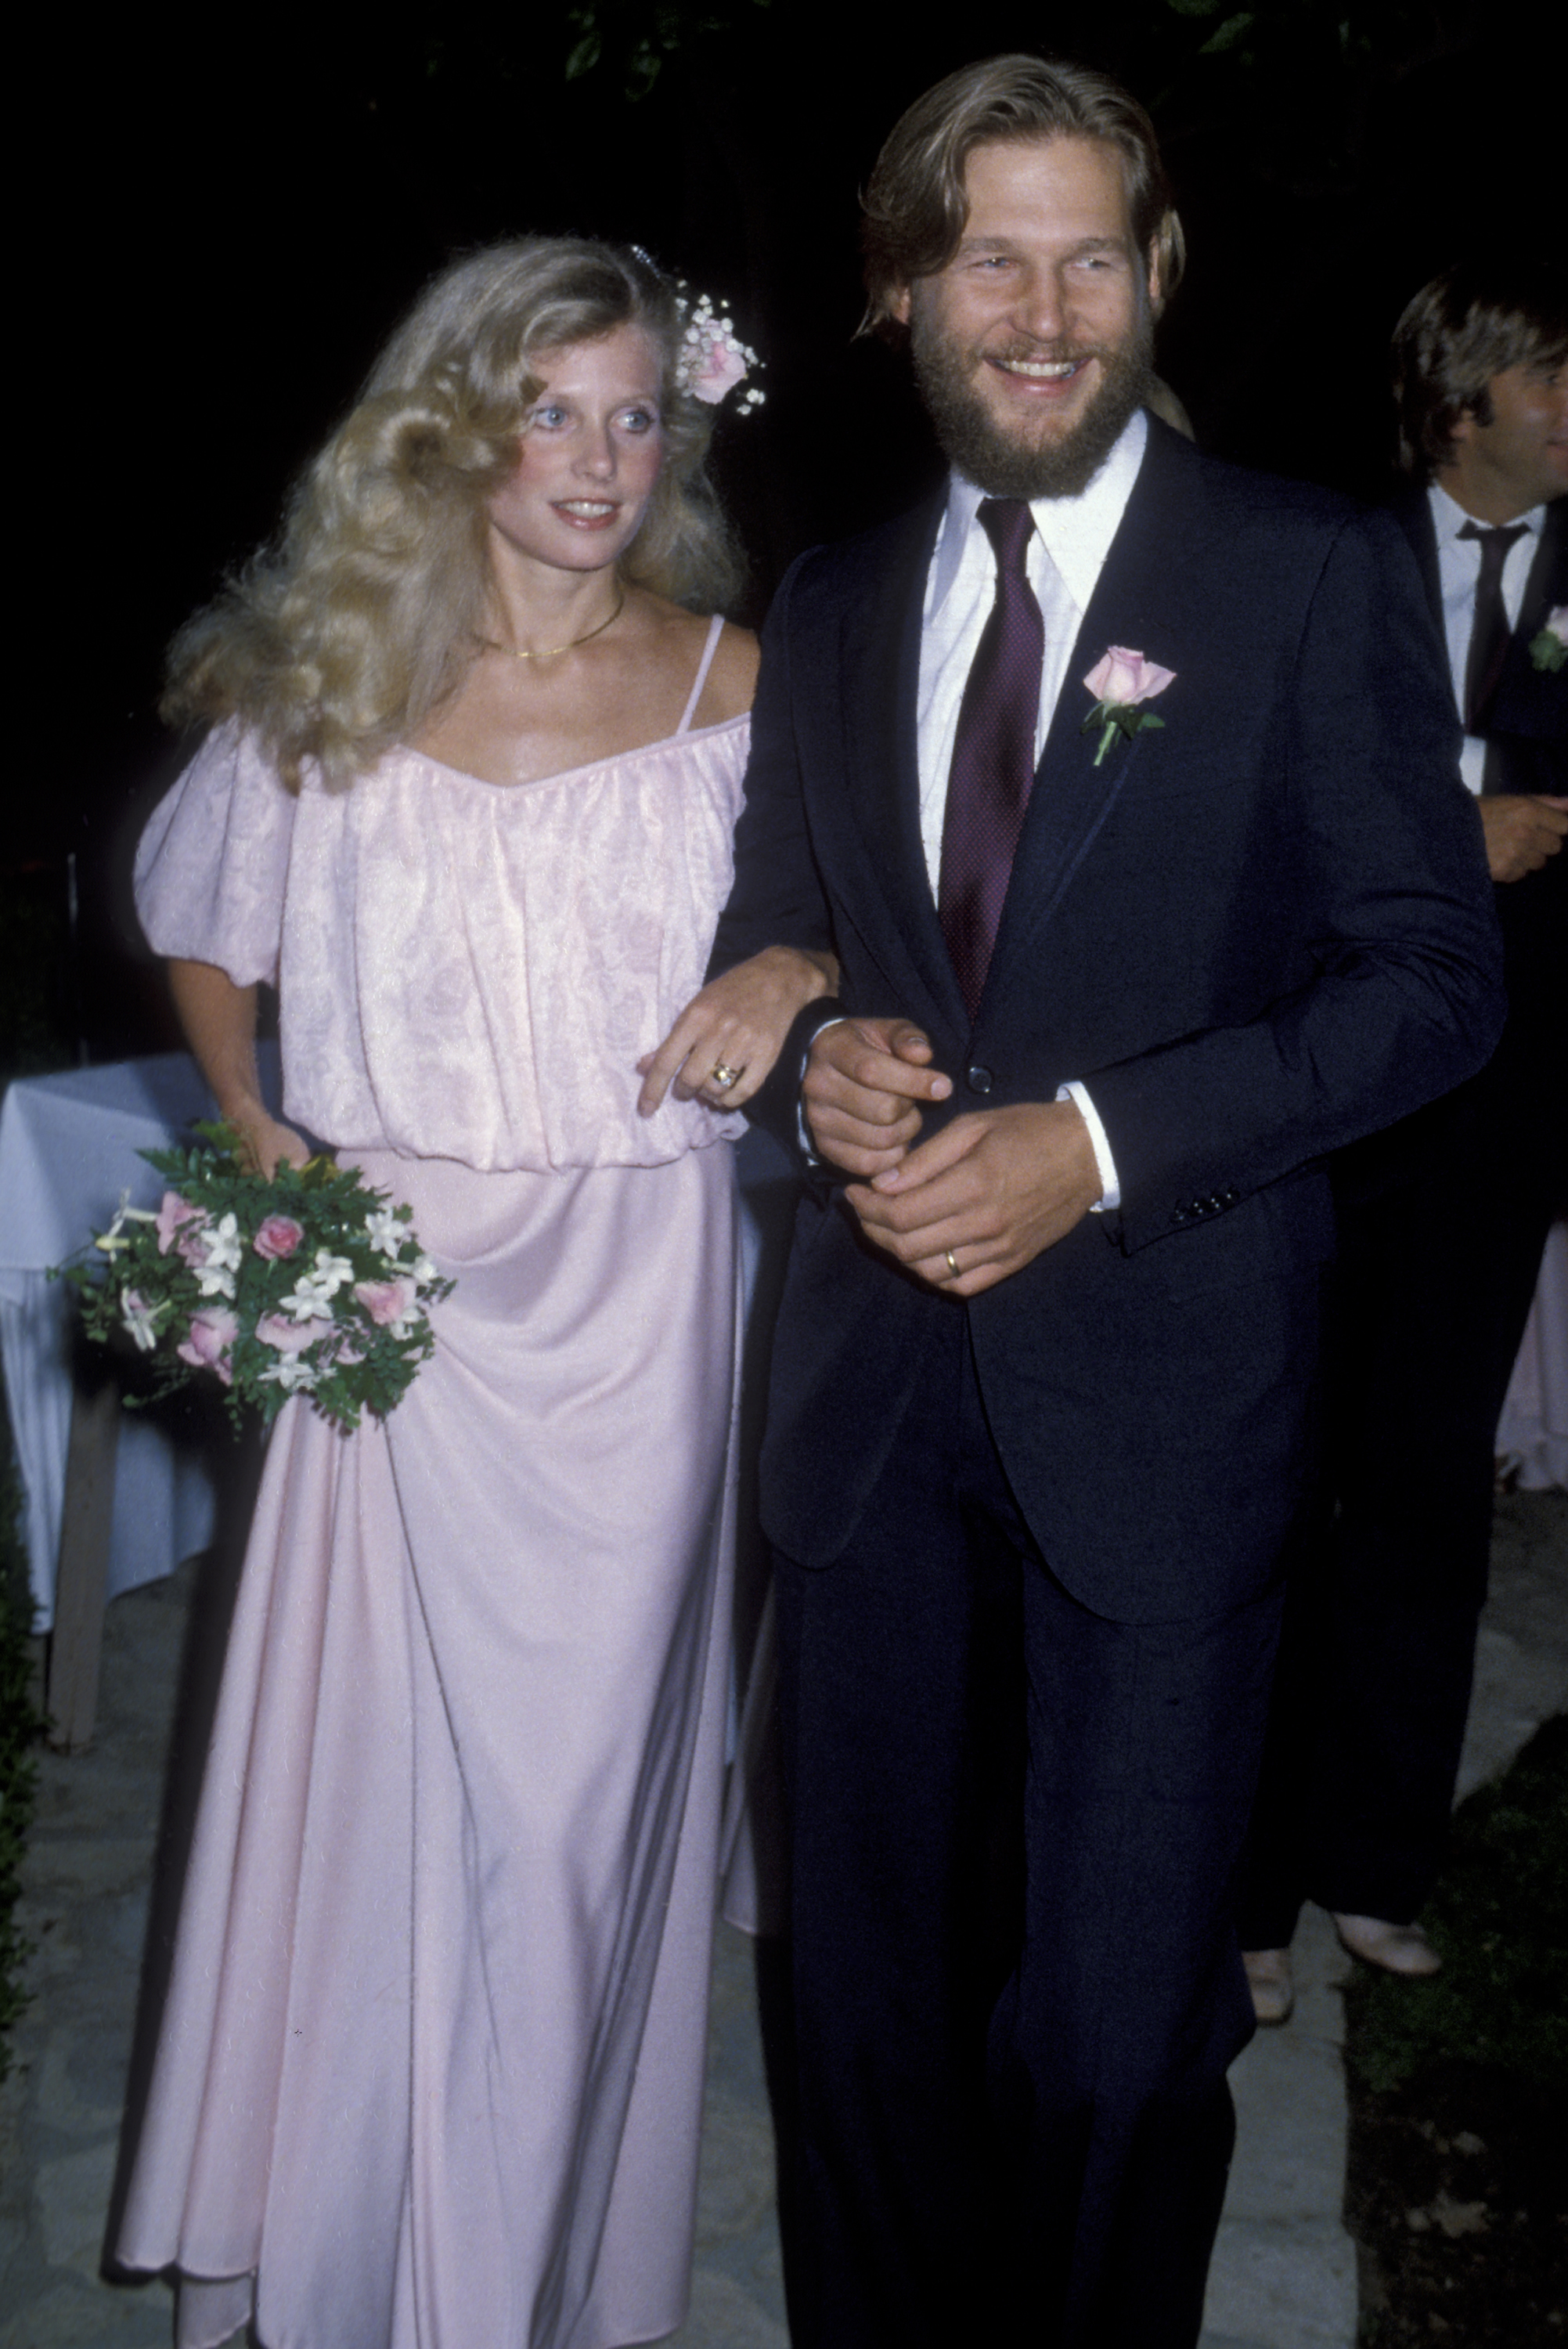 Jeff and Susan Bridges attend Cindy Bridges Wedding Reception in Bel Air, California on August 31, 1979. | Source: Getty Images